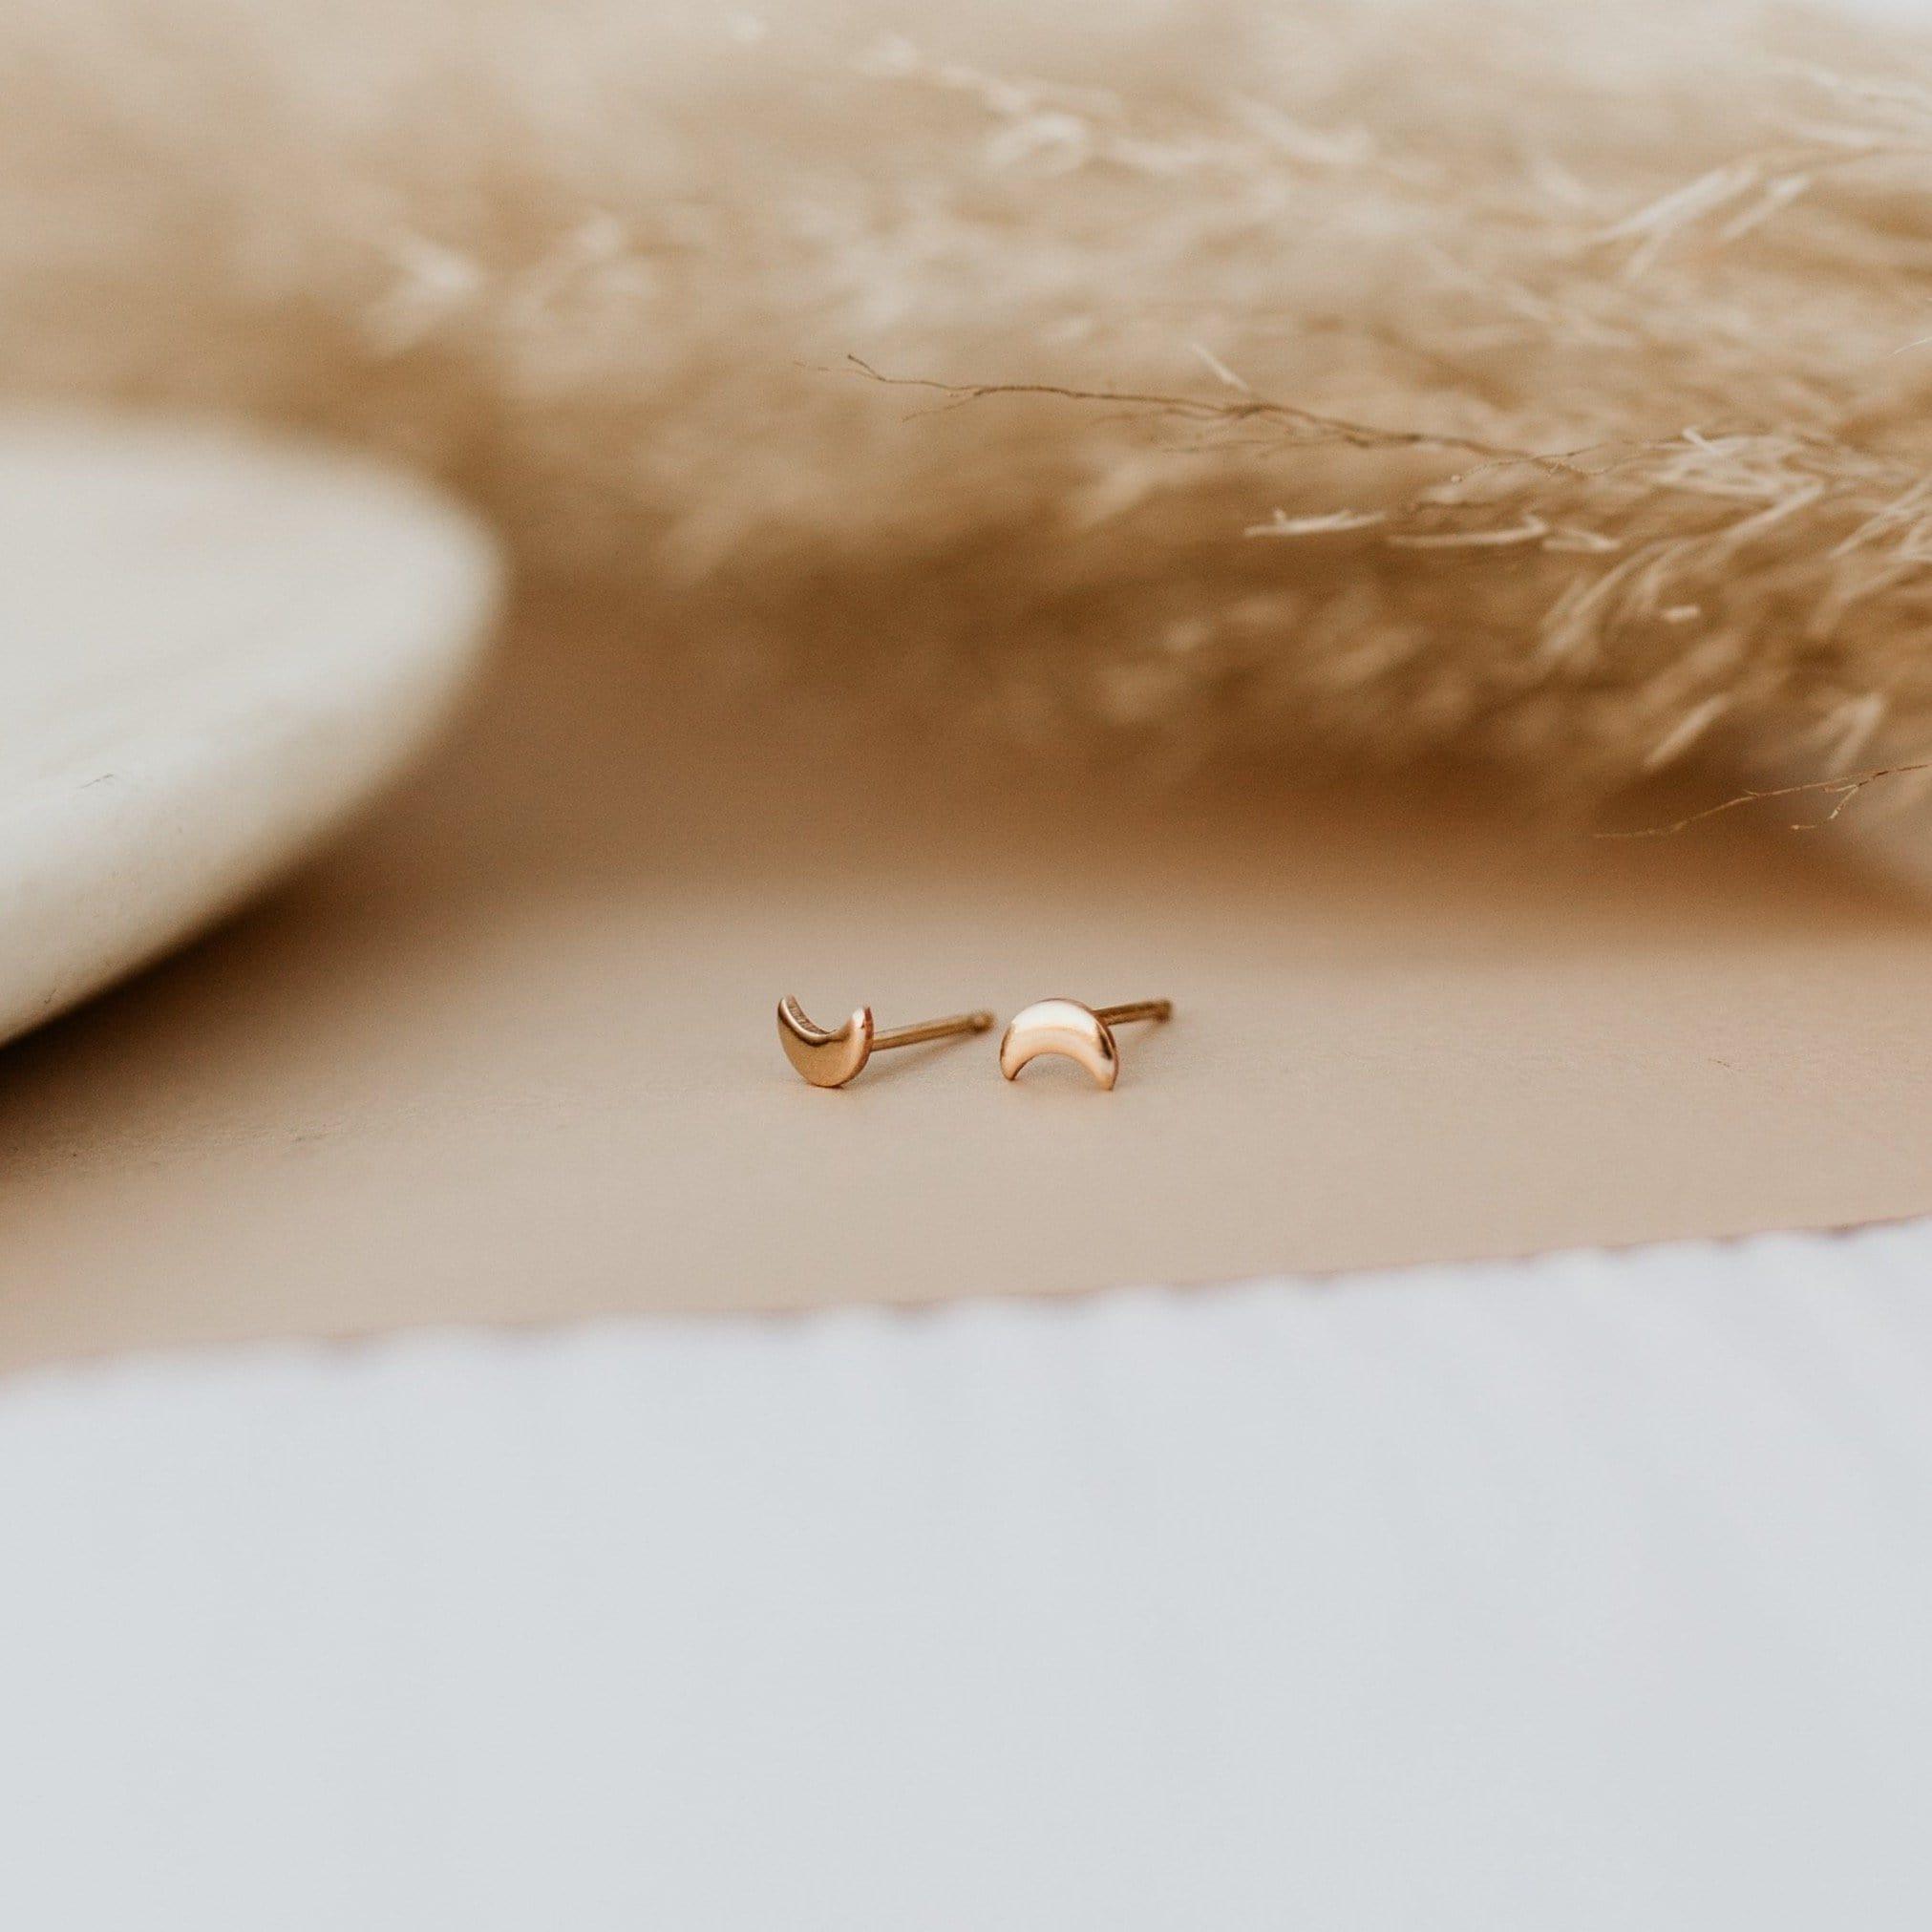 Tiny Moon Stud Earrings - Nolia Jewelry - Meaningful + Sustainably Handcrafted Jewelry